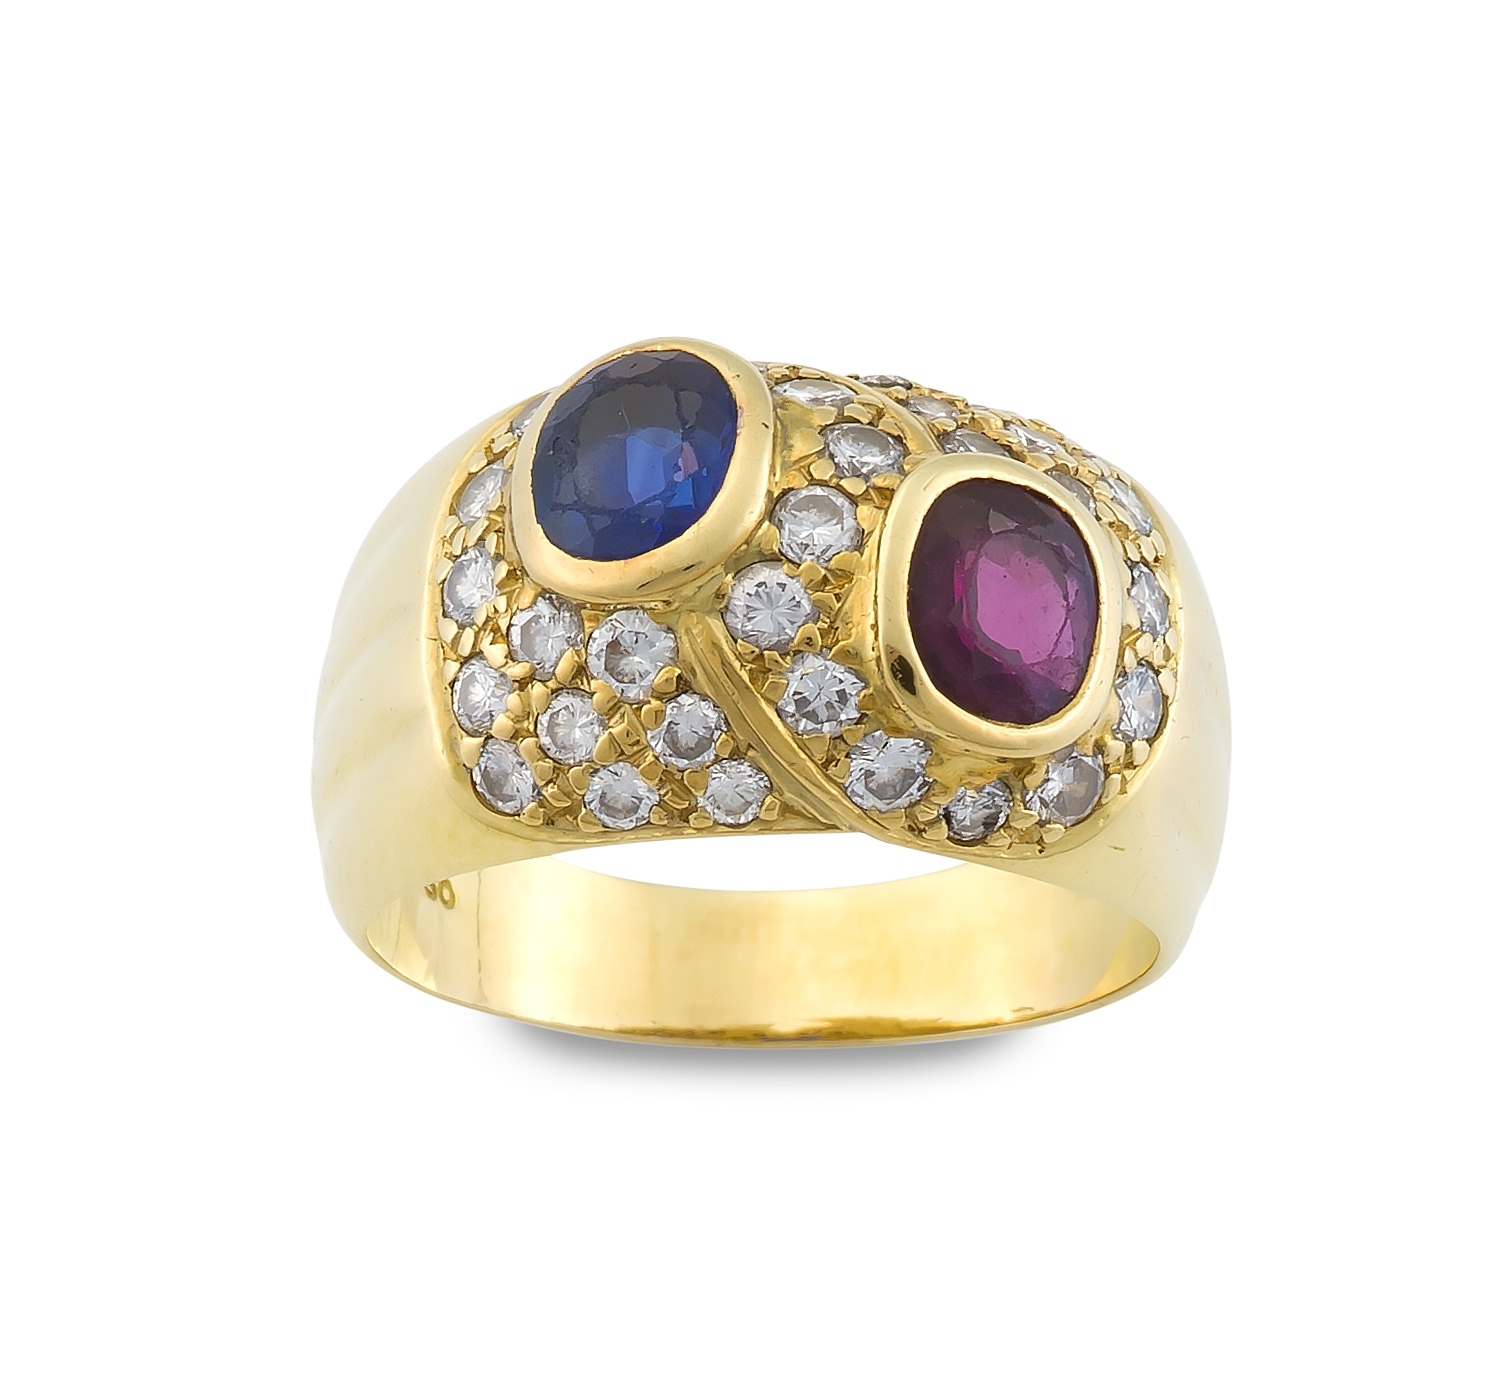 Ruby, sapphire, diamond and 18ct gold ring